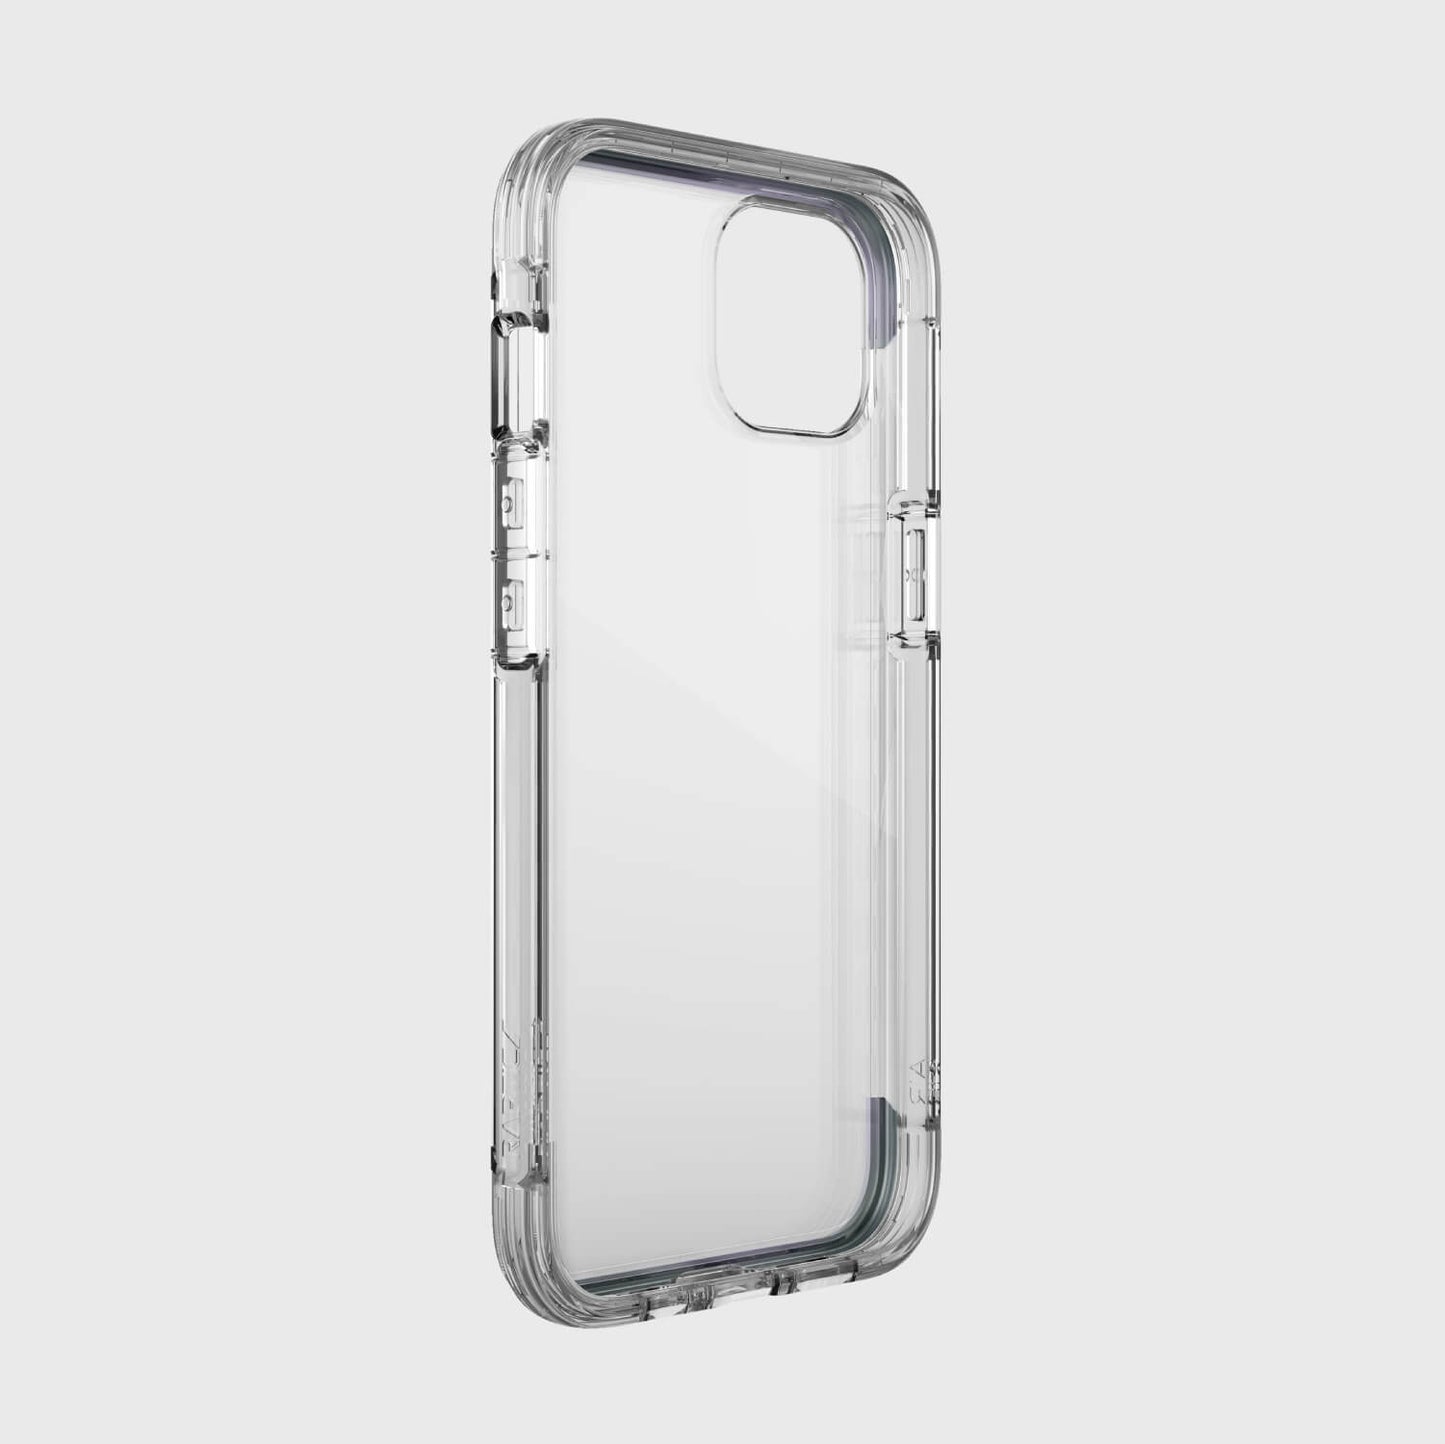 A drop-proof Raptic iPhone 13 Case - AIR on a white background.